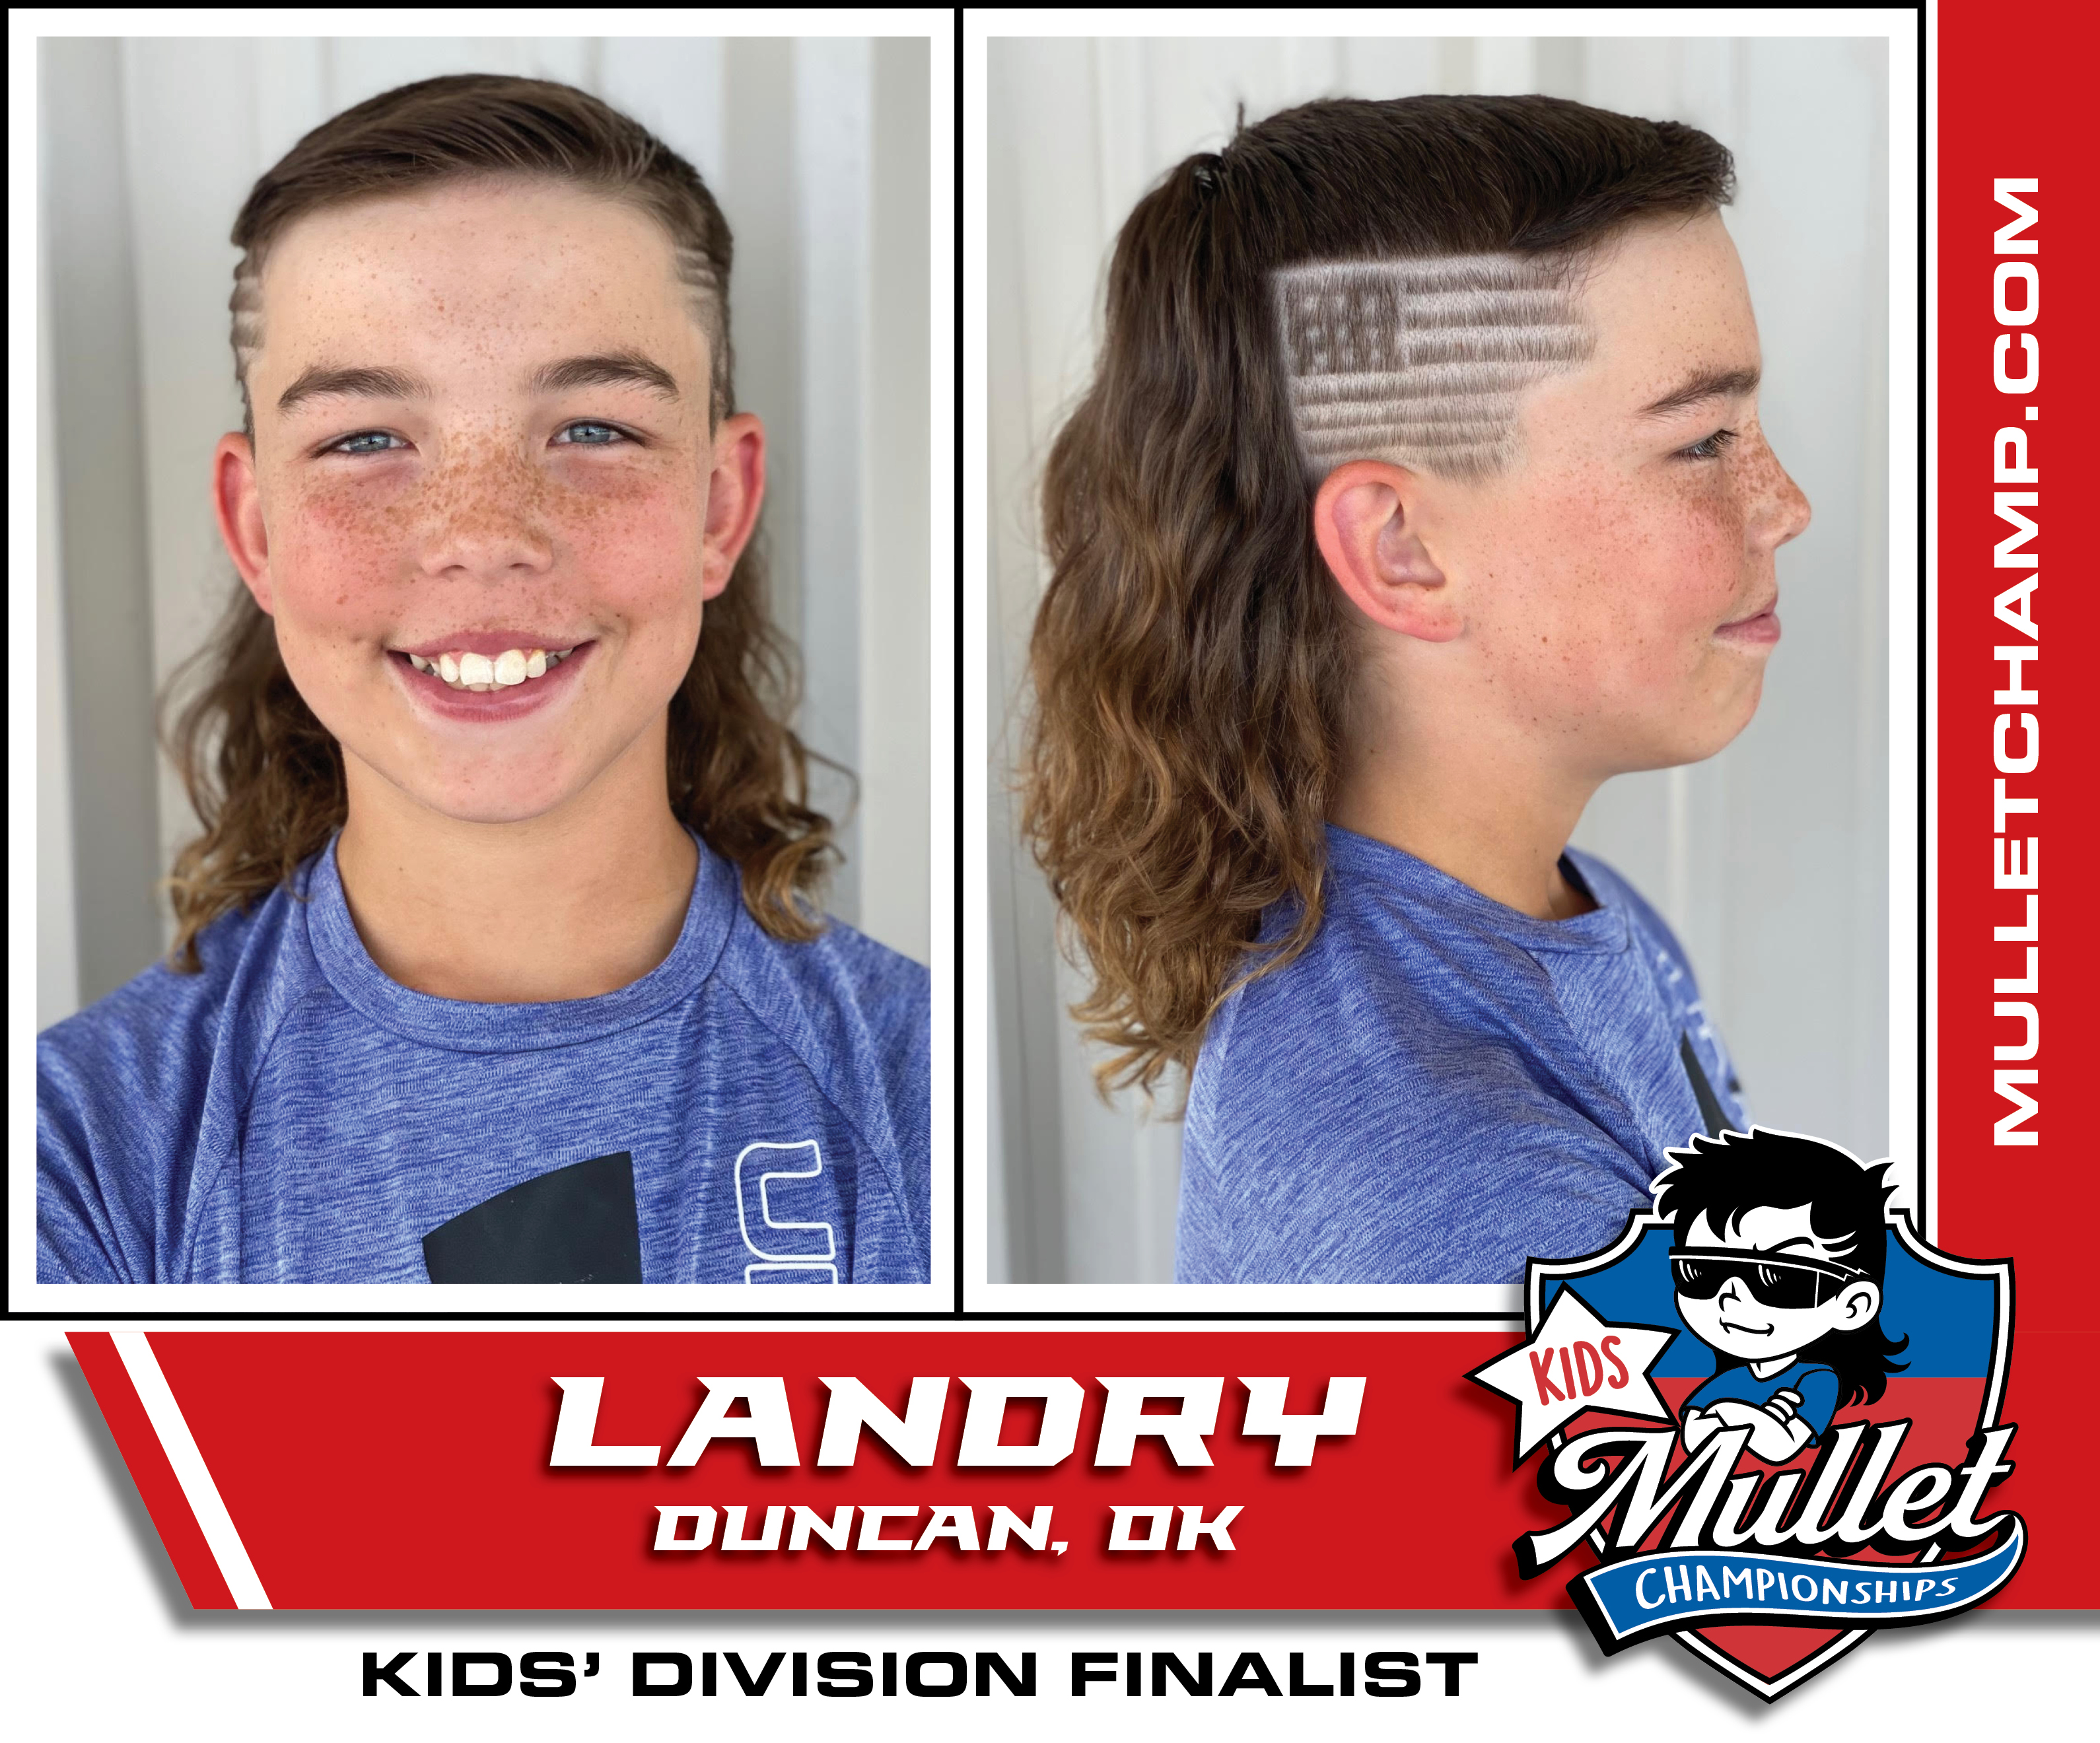 Landry Turpin, a kids division finalist in the 2022 USA Mullet Championships.